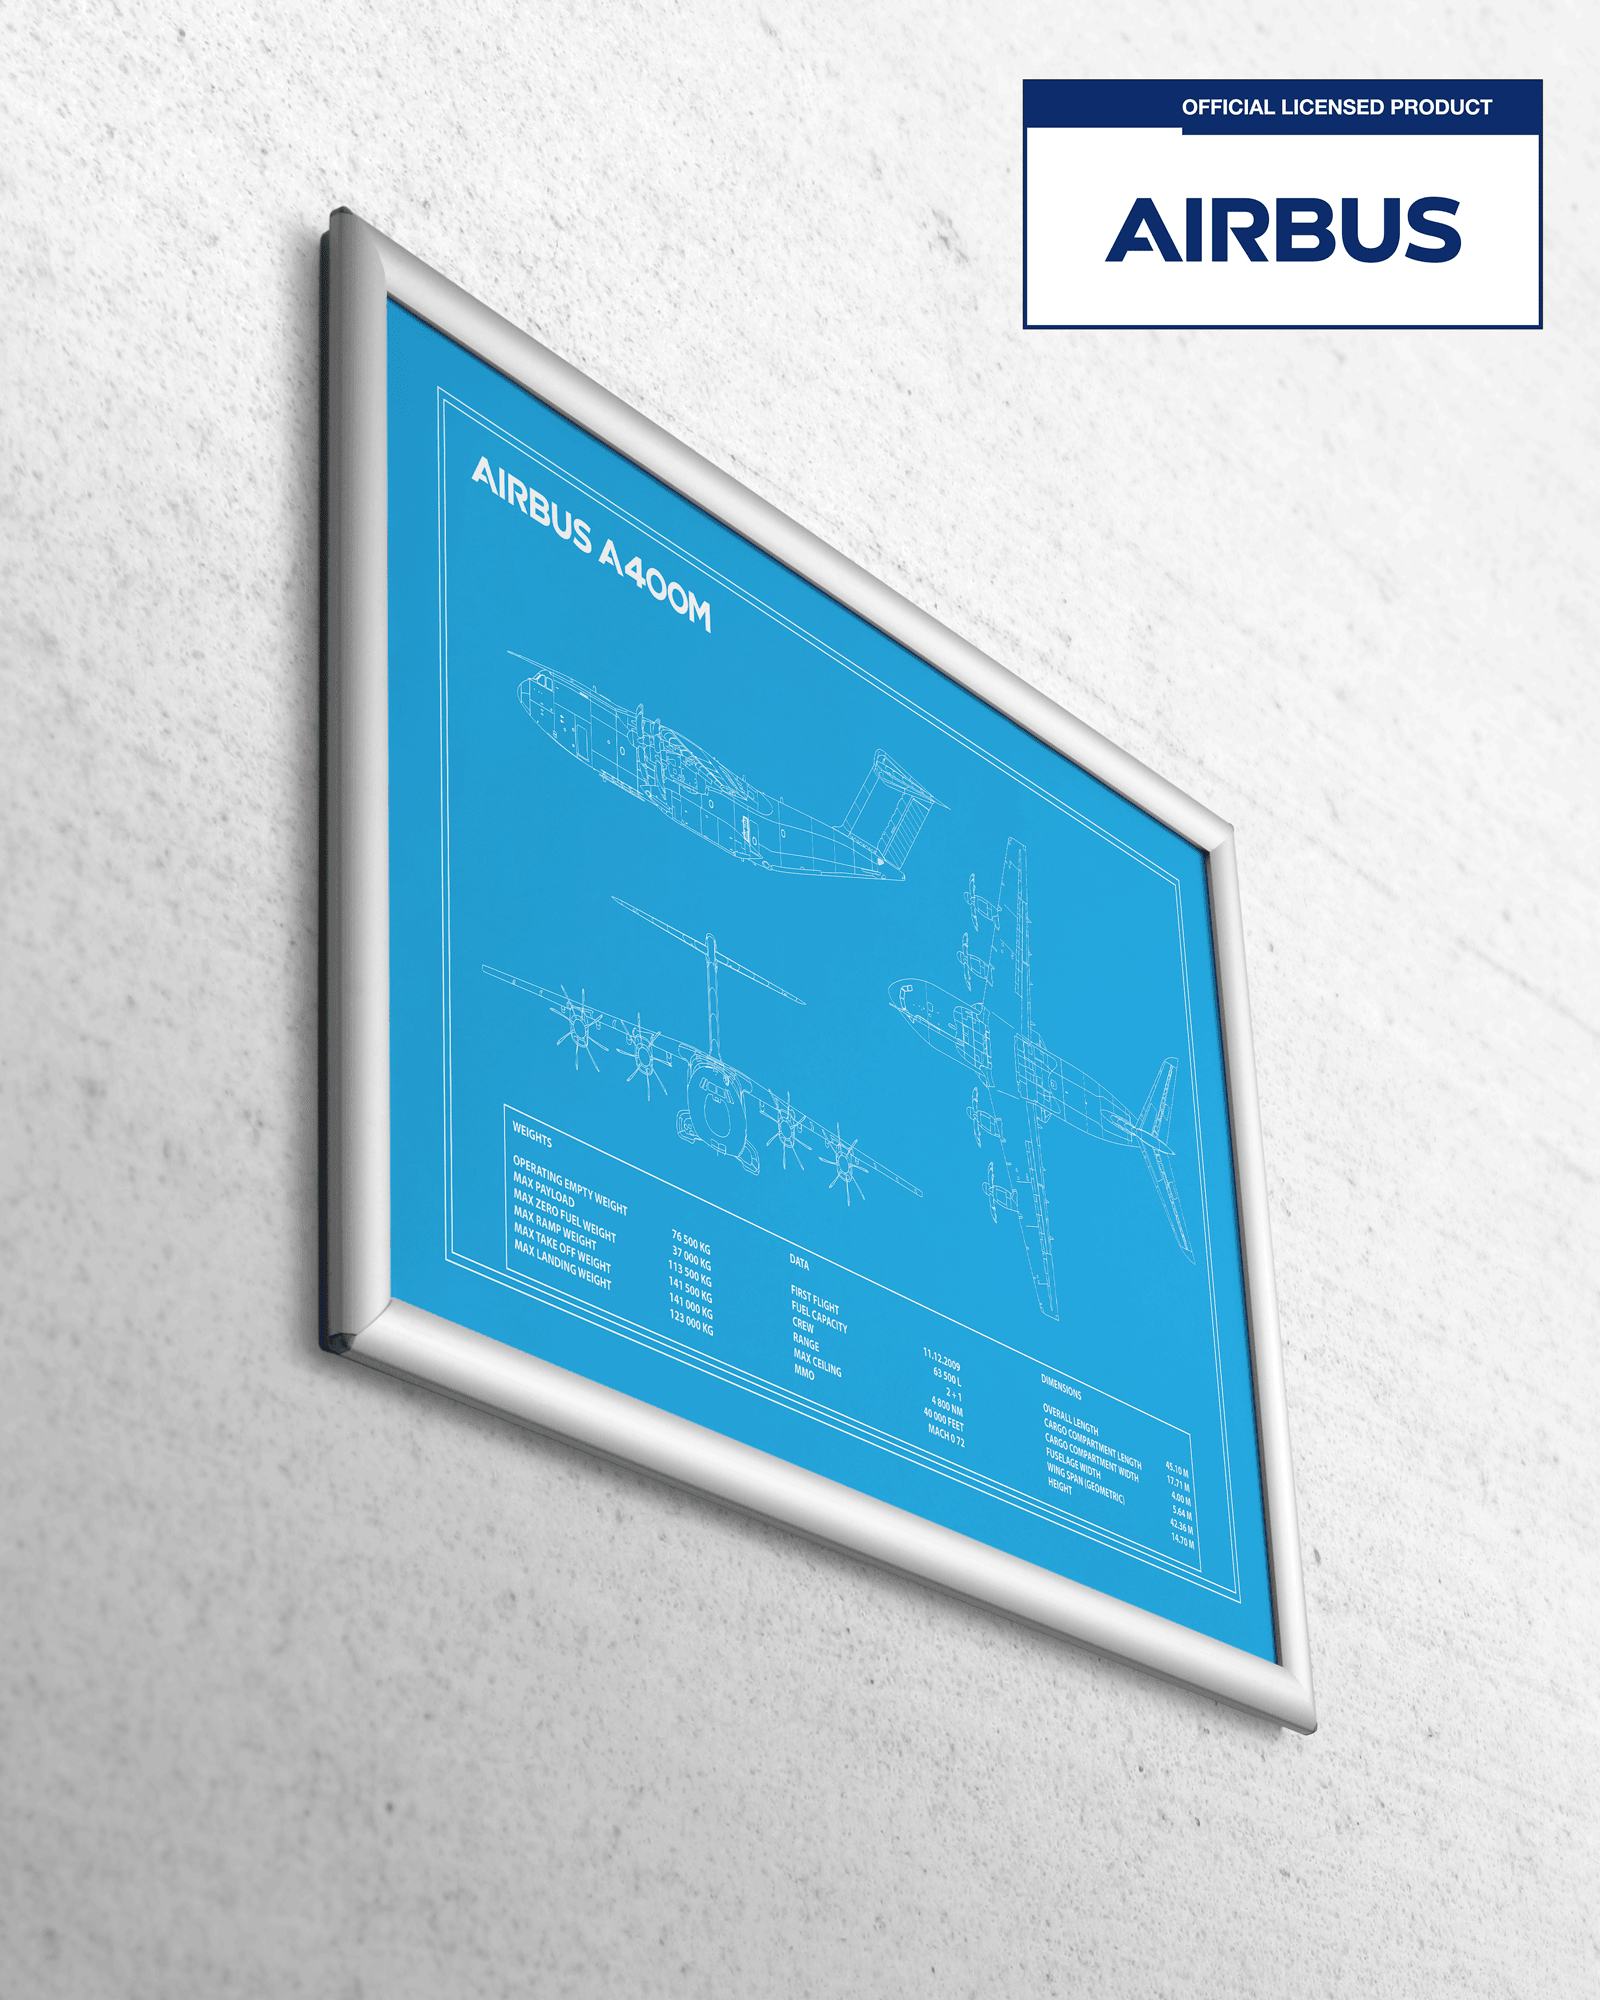 Airbus A400M Blueprint Poster